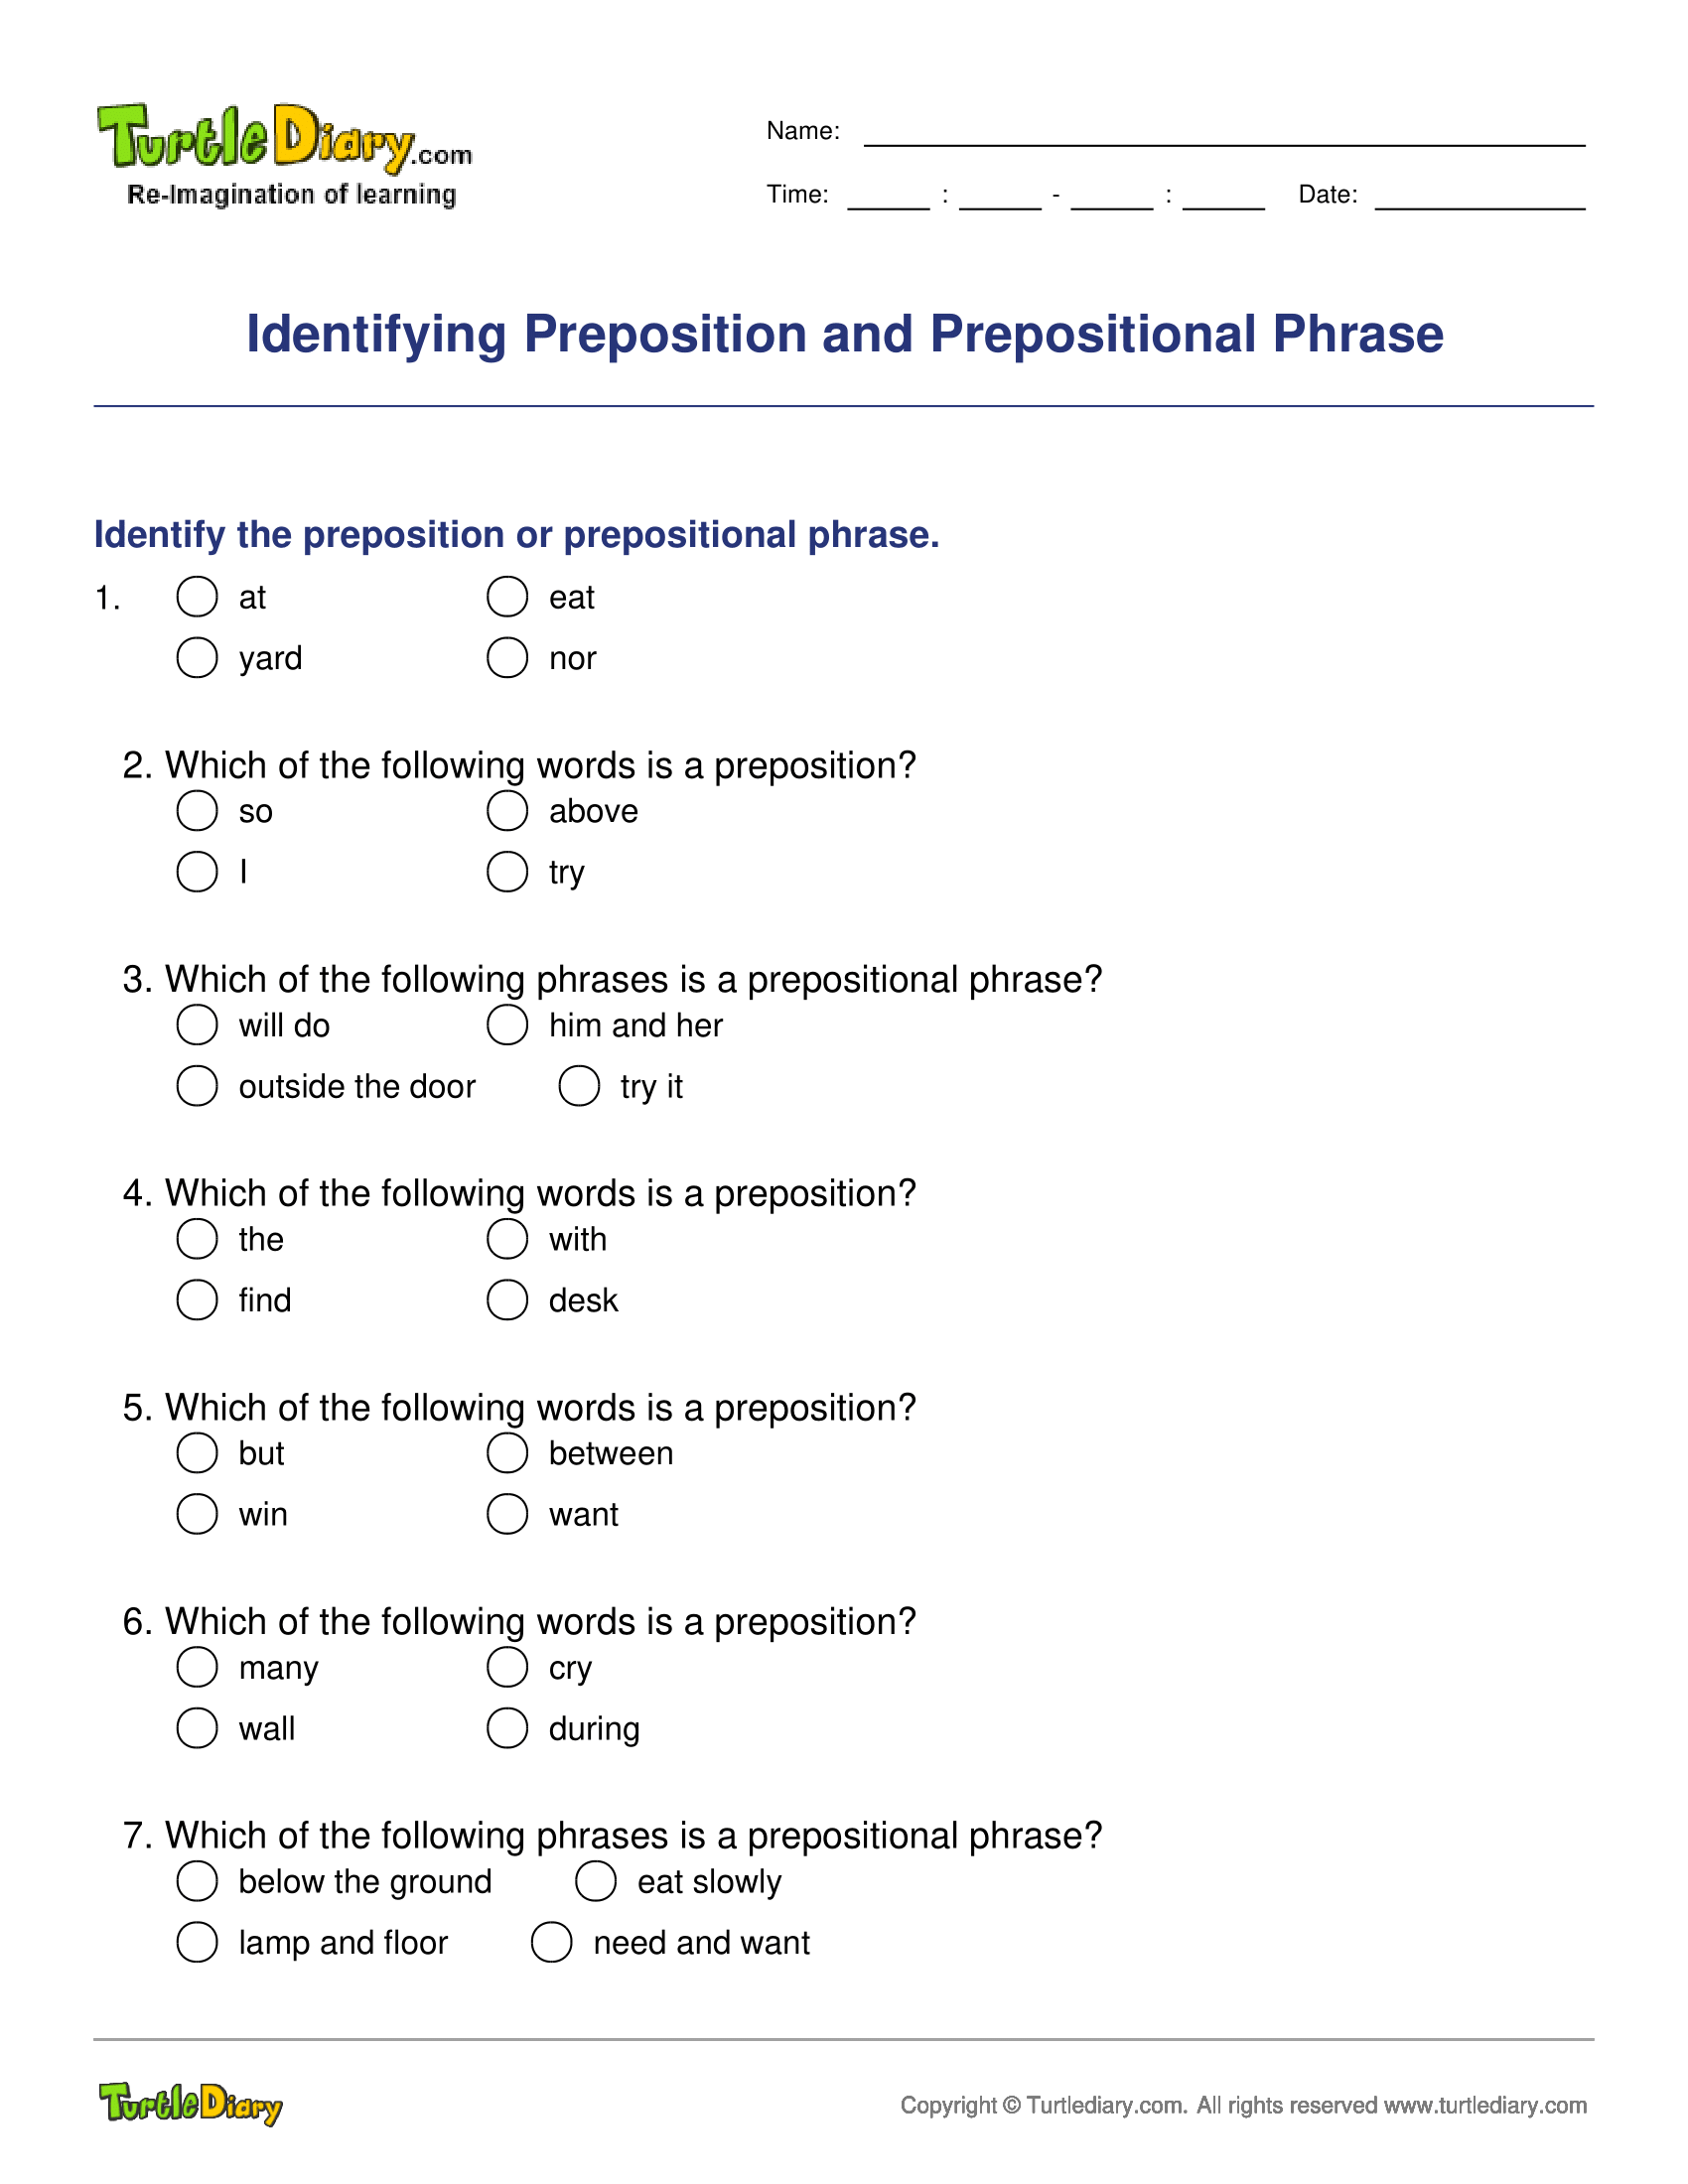 Identifying Preposition and Prepositional Phrase